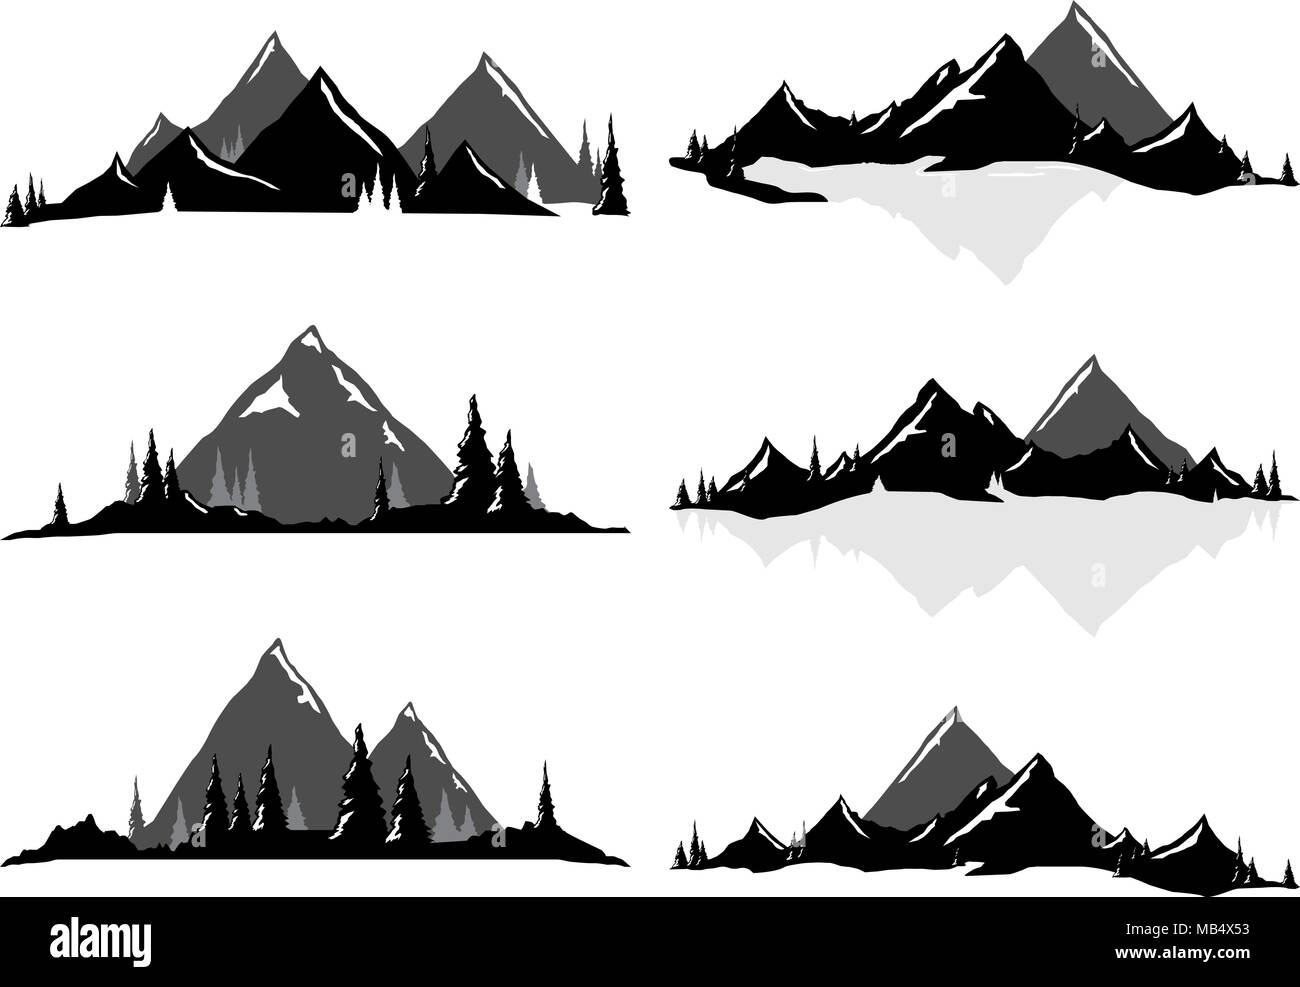 Various vector illustrations of mountains and hills with trees and water. All objects can be ungrouped and easily moved around. If you want to move or Stock Vector